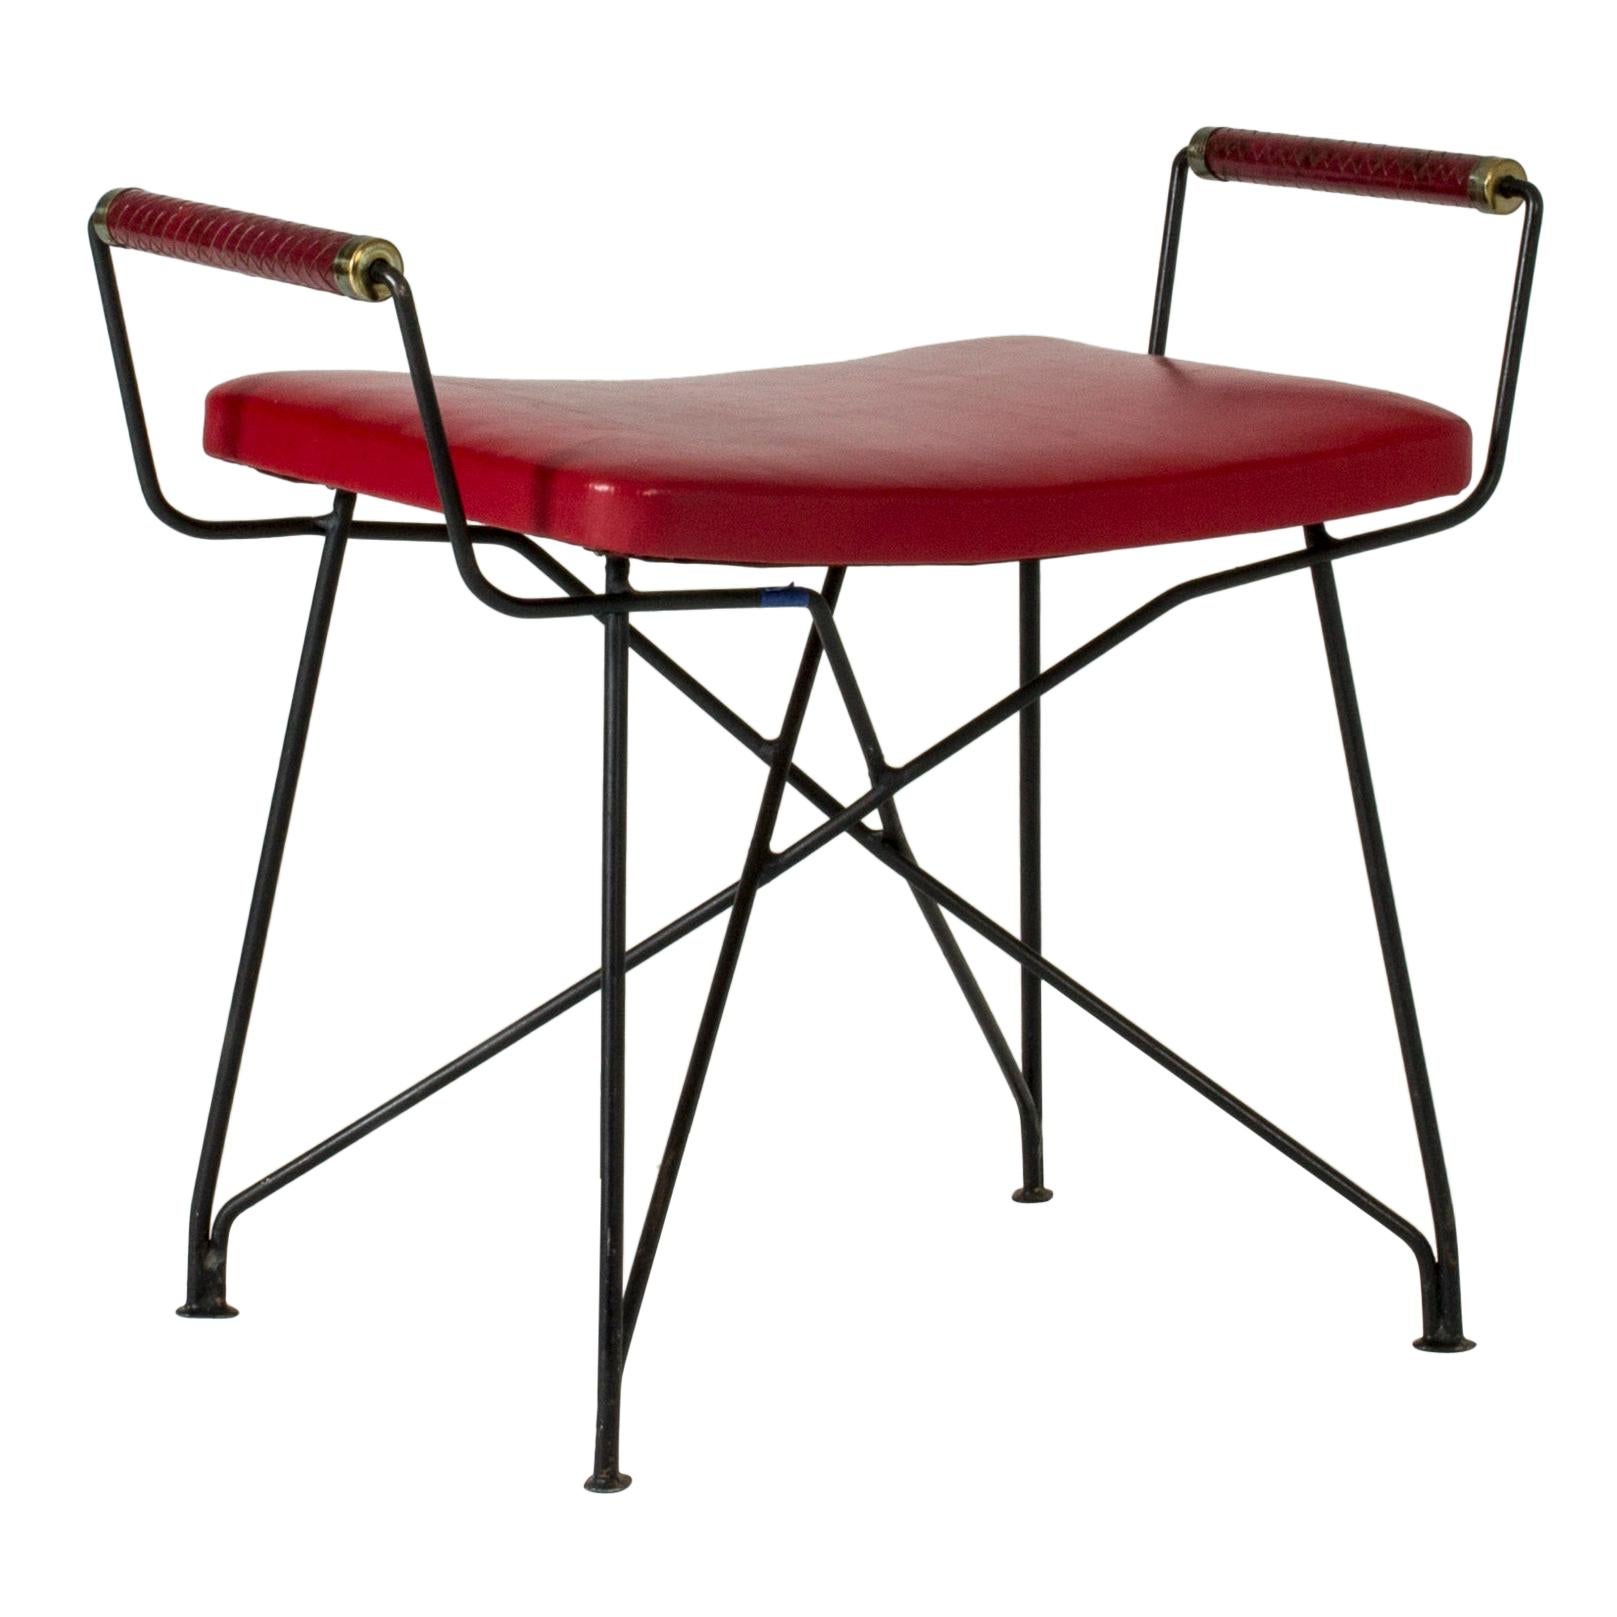 Rare Swedish Metal and Leather Stool by Hans-Agne Jakobsson, 1960s